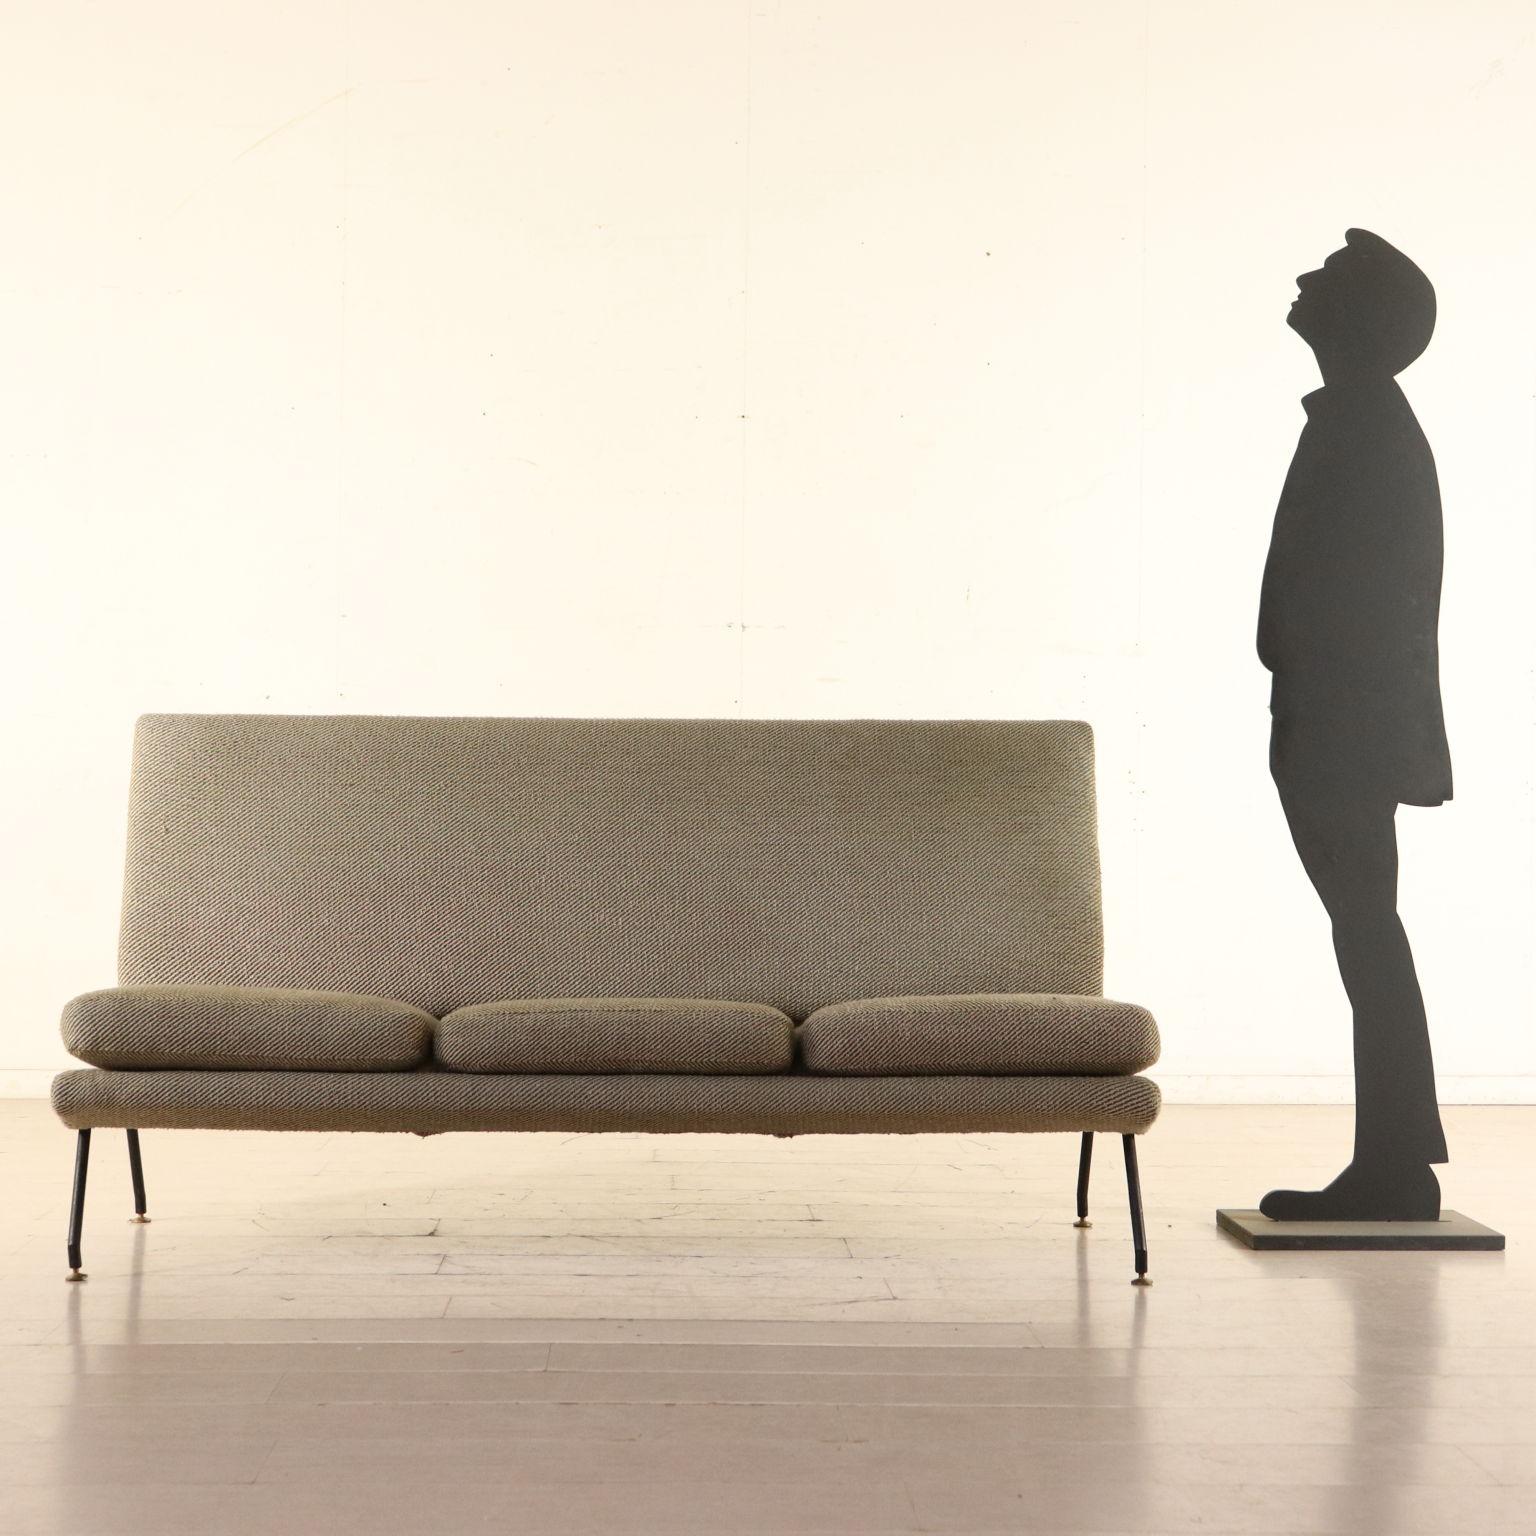 A sofa designed for Isa, foam padding, fabric upholstery, metal and brass legs. Manufactured in Italy, 1960s.